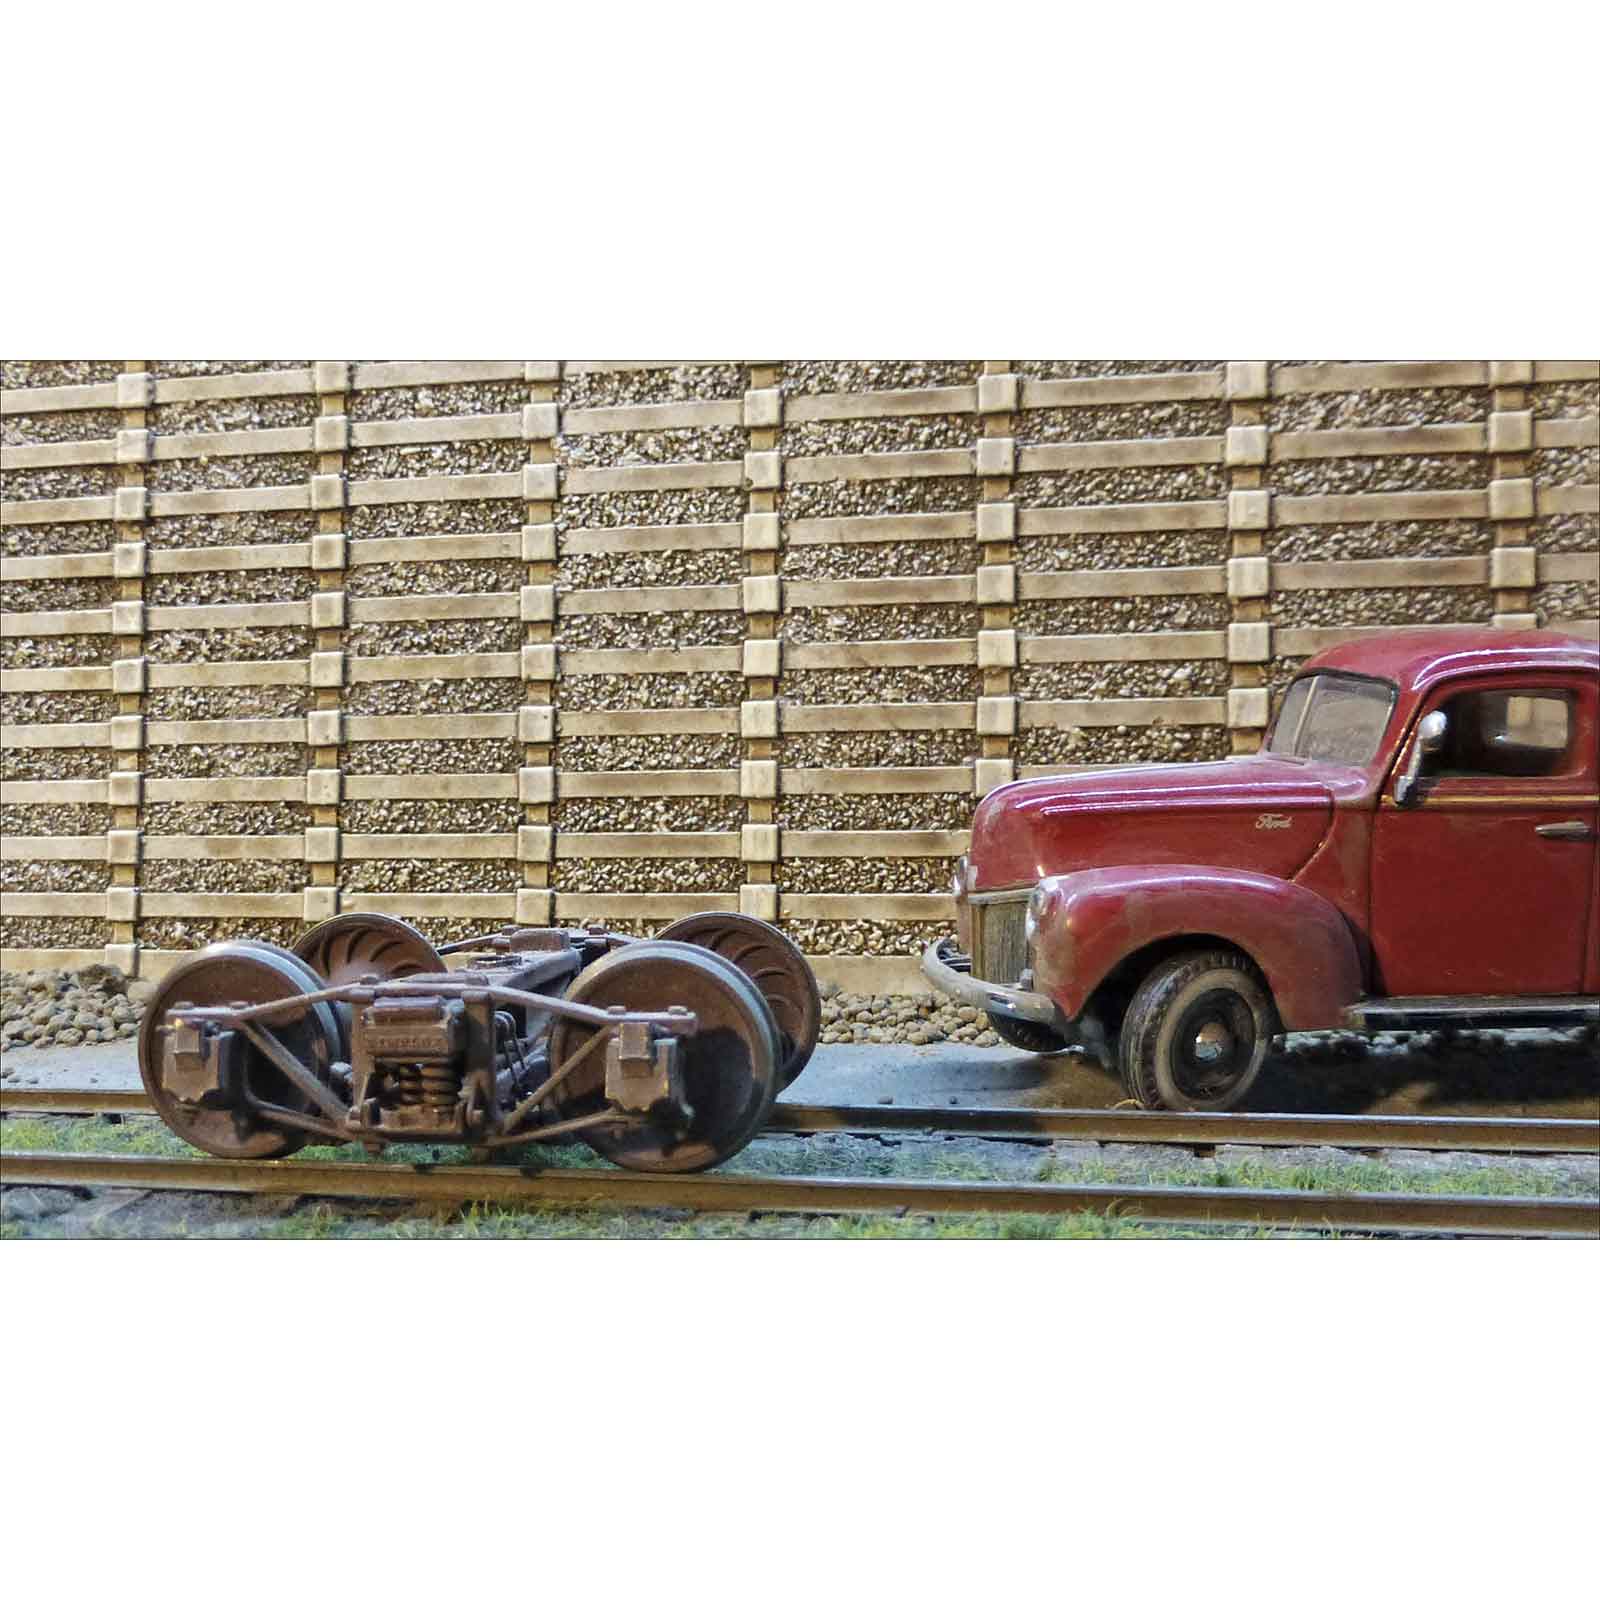 Chooch Flexible Concrete Cribbing Wall, Small with Peel & Stick Backing - HO & N Scale